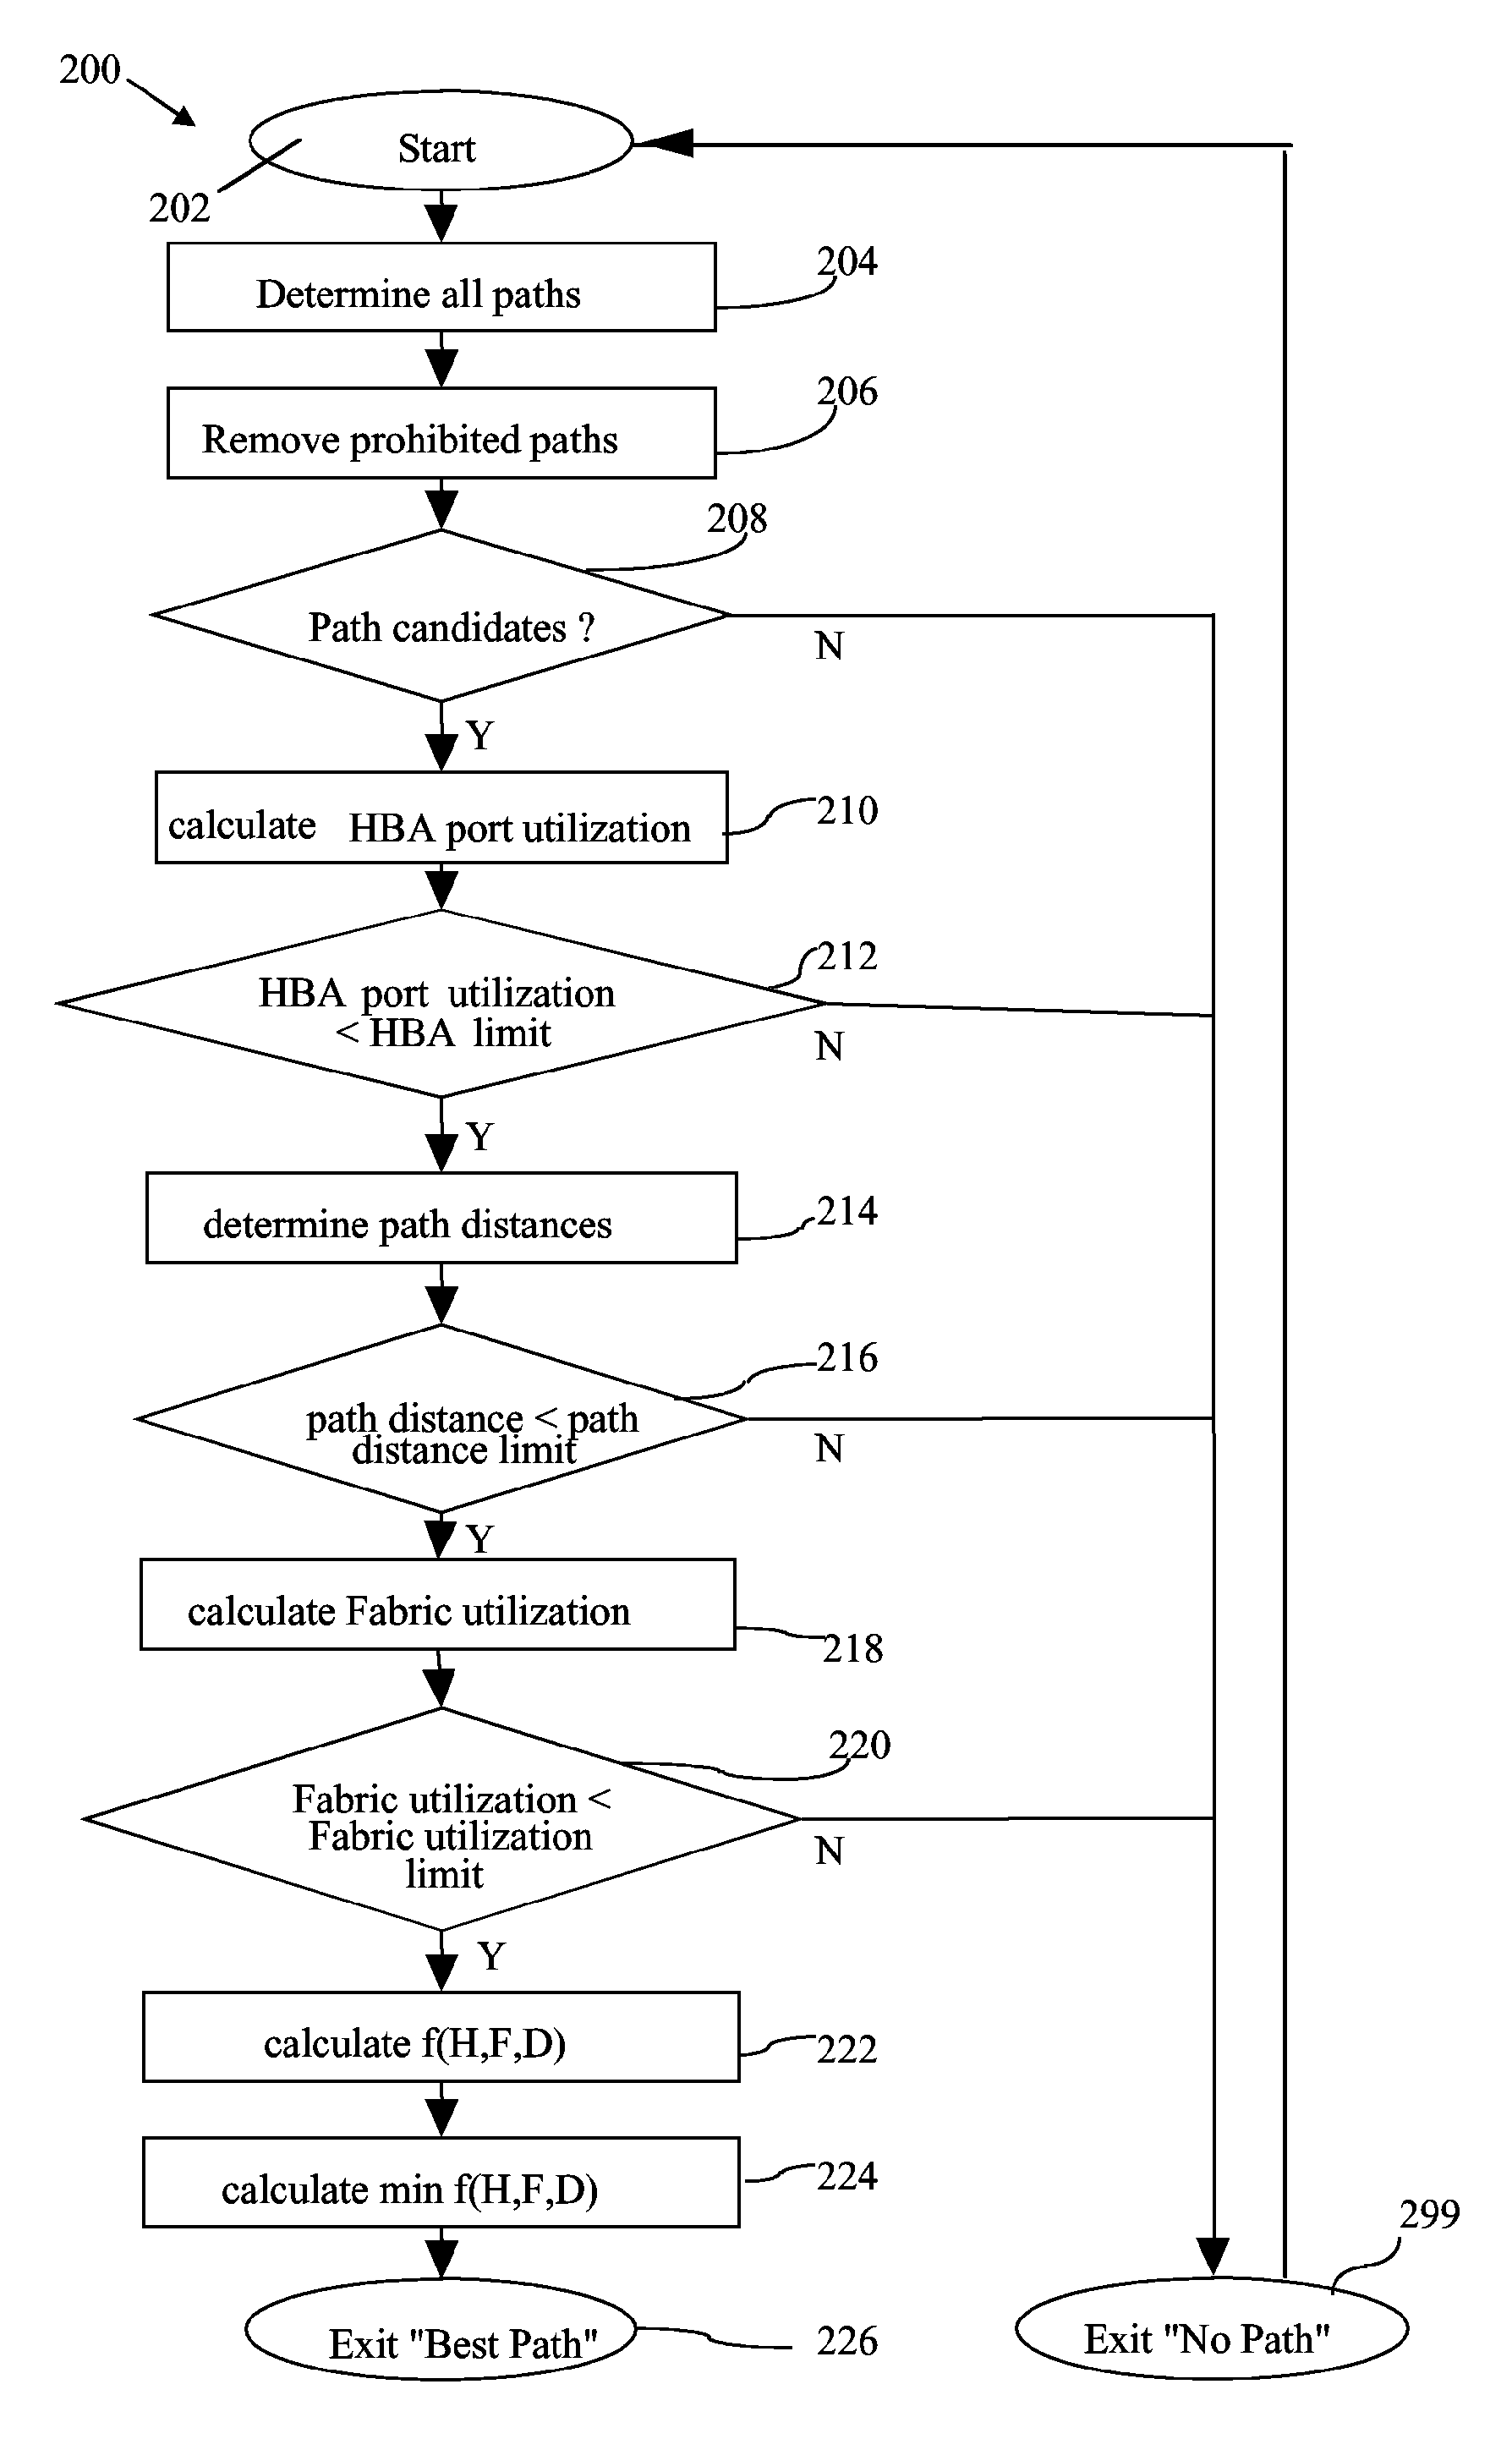 Load Distribution in Storage Area Networks